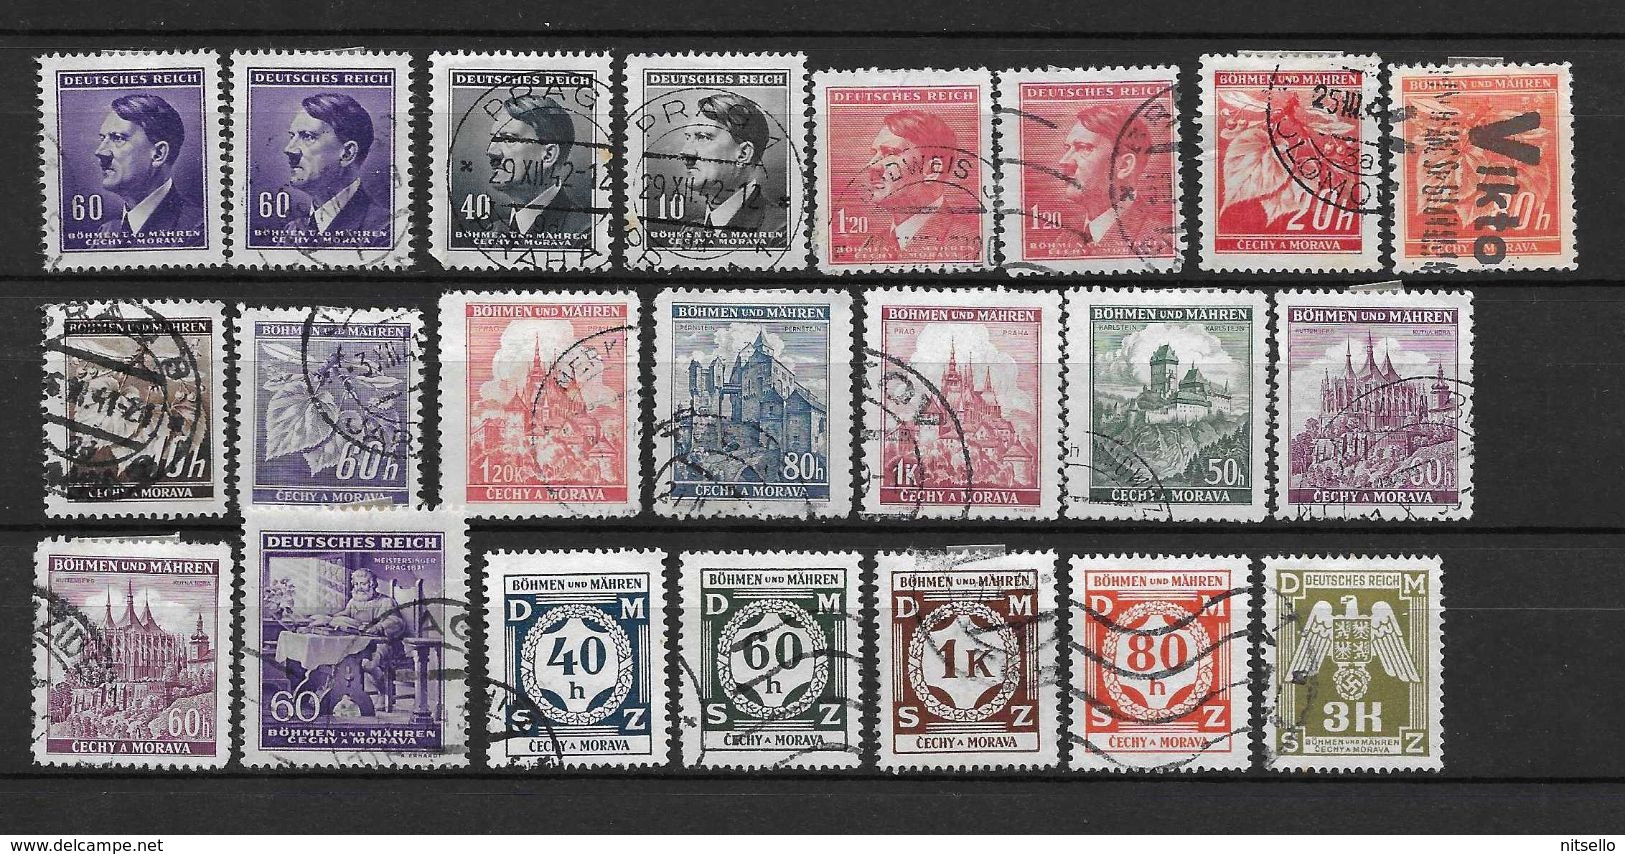 LOTE 2148 A ///  BOHEMIA Y MORAVIA   LOTE - Used Stamps